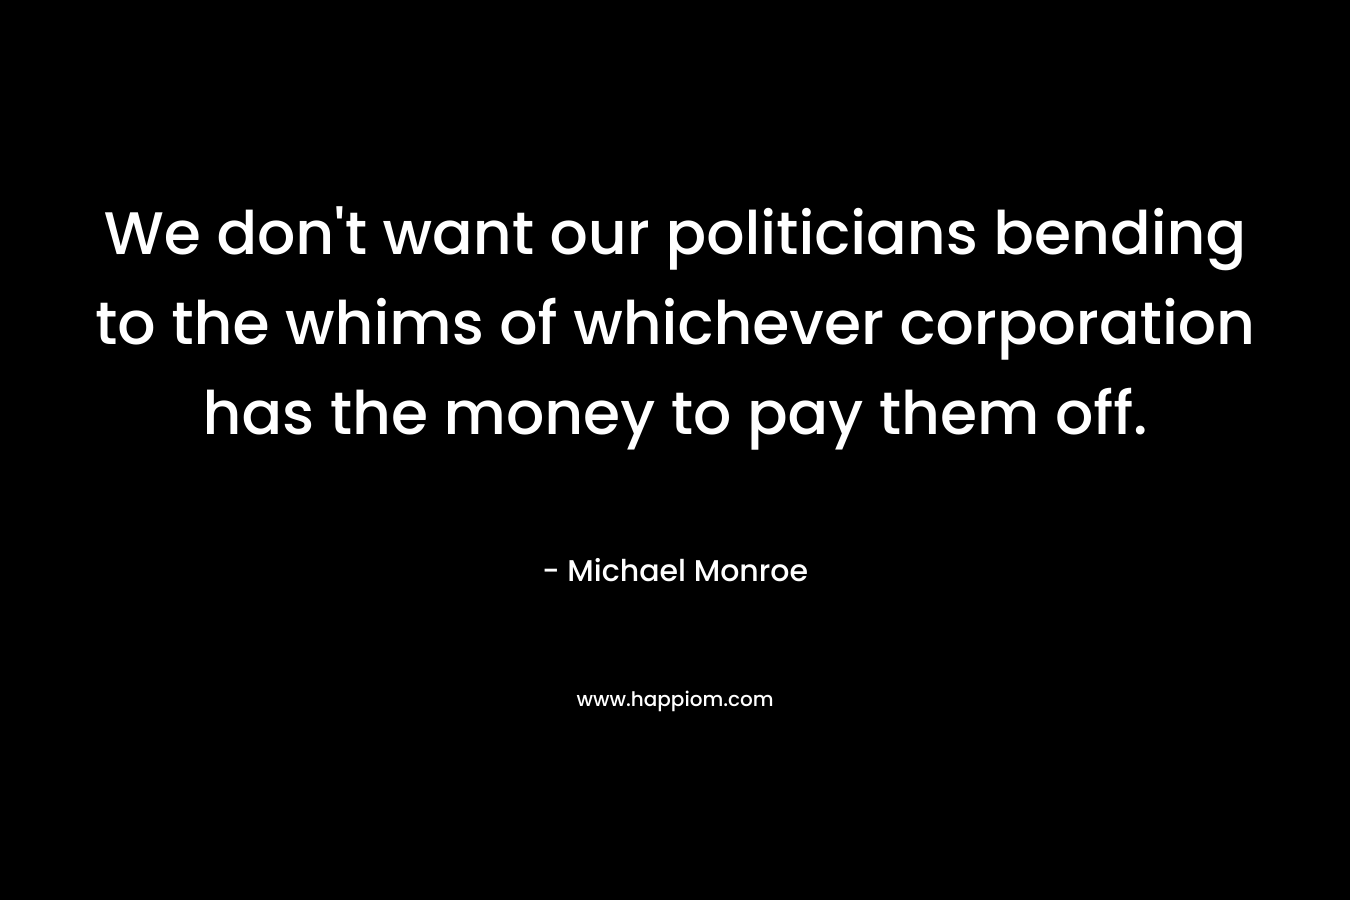 We don't want our politicians bending to the whims of whichever corporation has the money to pay them off.